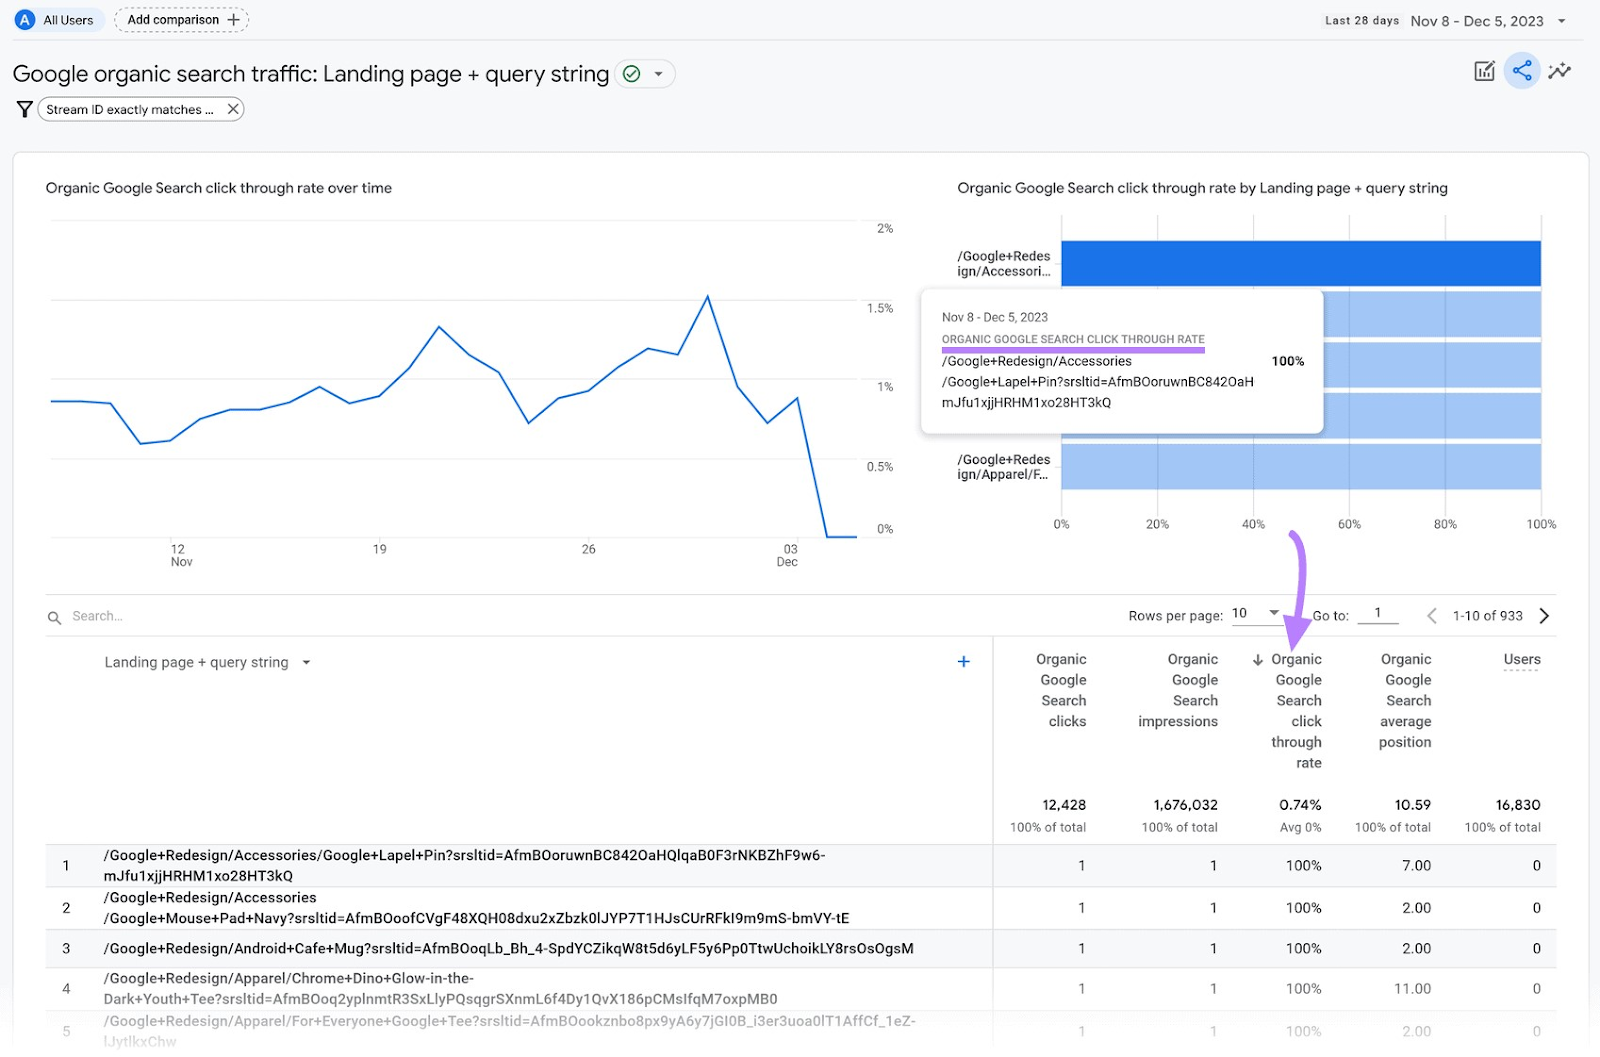 Google Organic Search Traffic: Landing page + query string dashboard